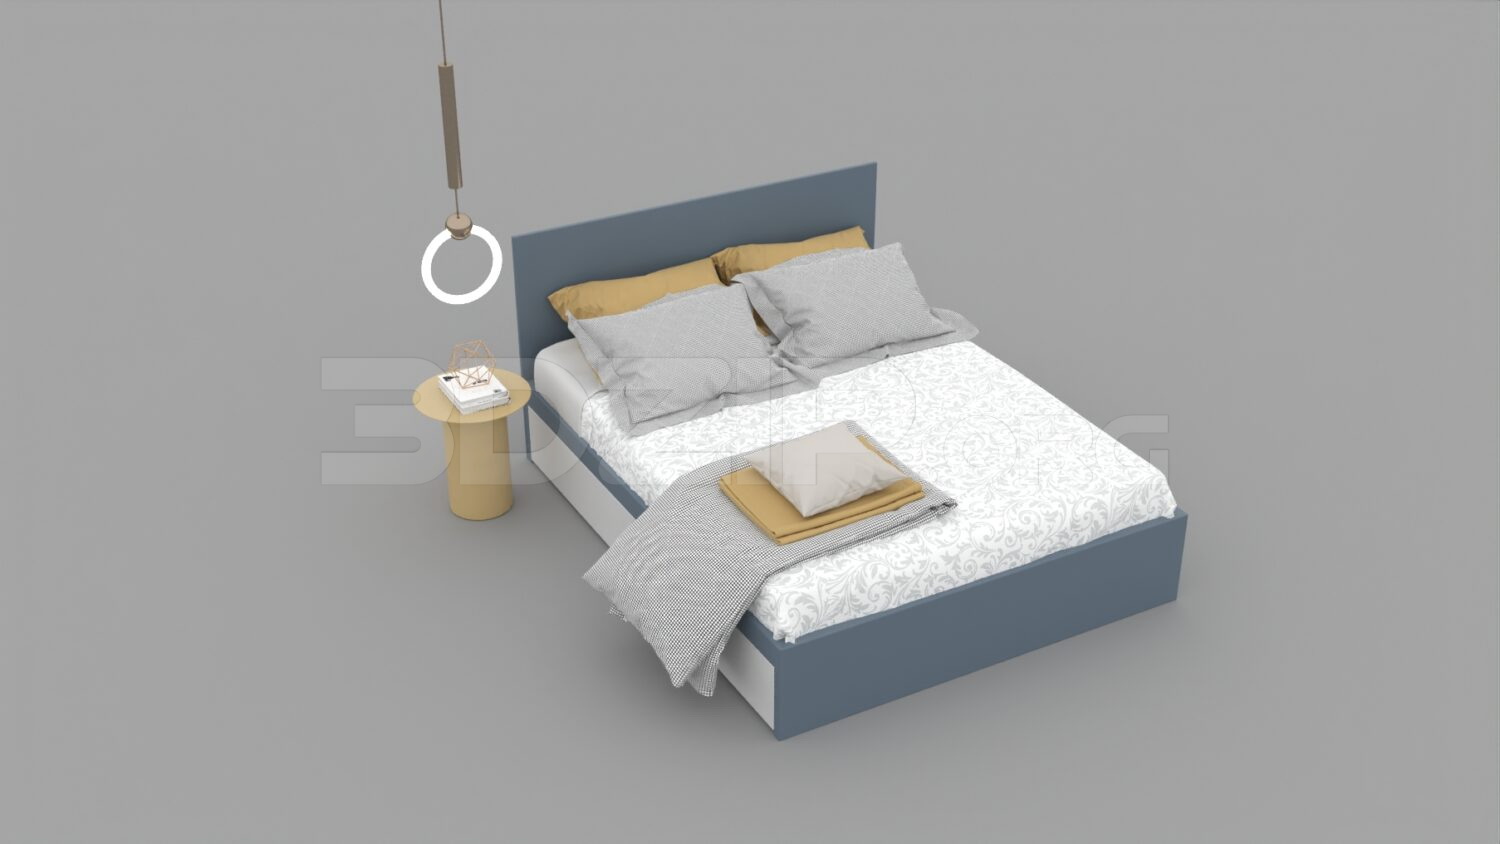 2356. Download Free Bed Model By Du Ta